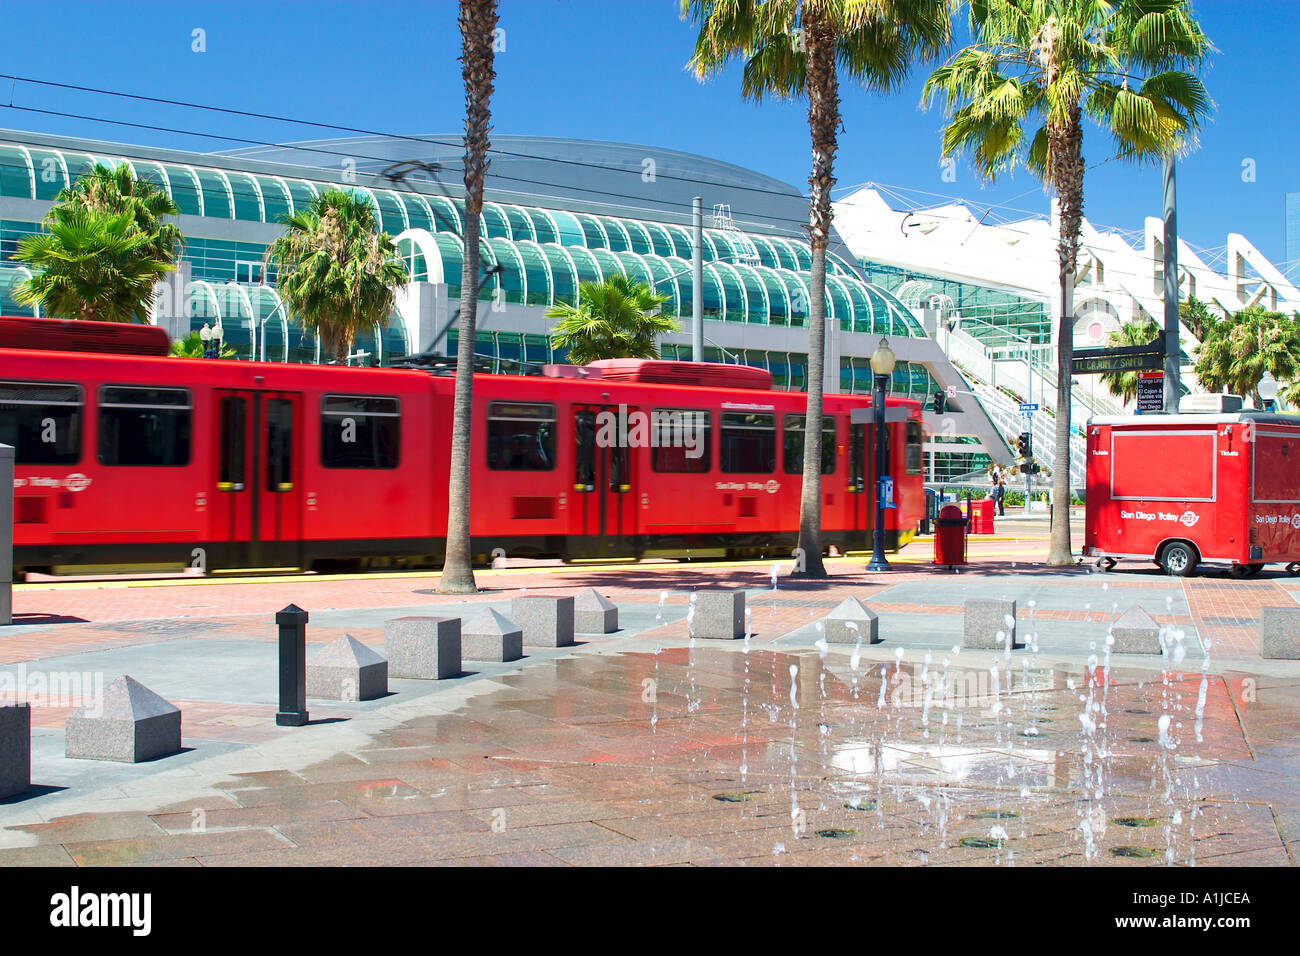 Red Trolley in front of San Diego Convention Center Stock Photo - Alamy